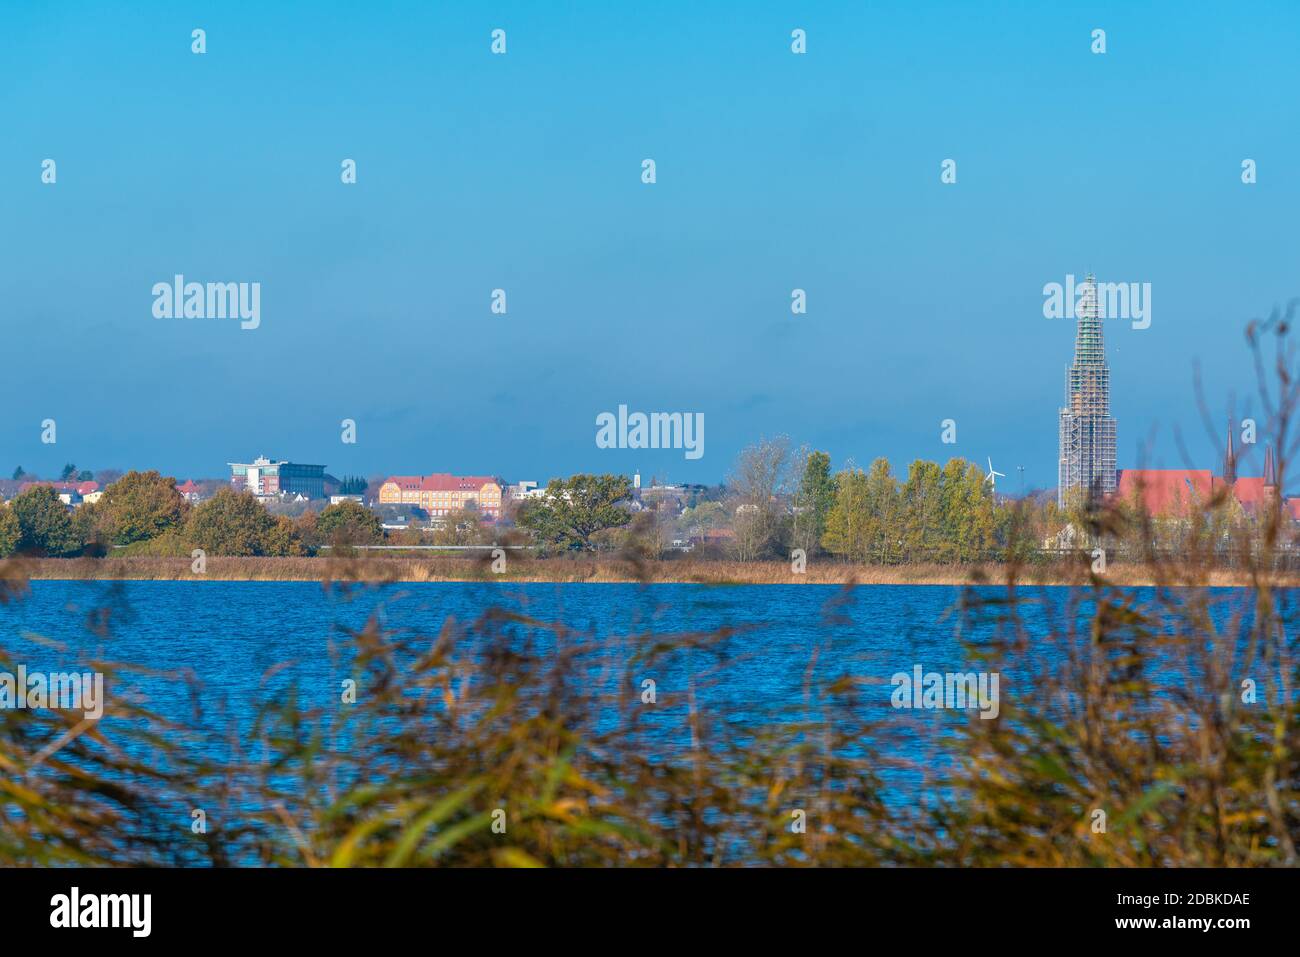 Lake Haddebyer Noor with the historic town of Schleswig, Schleswig-Holstein, North Germany, Central Europe Stock Photo